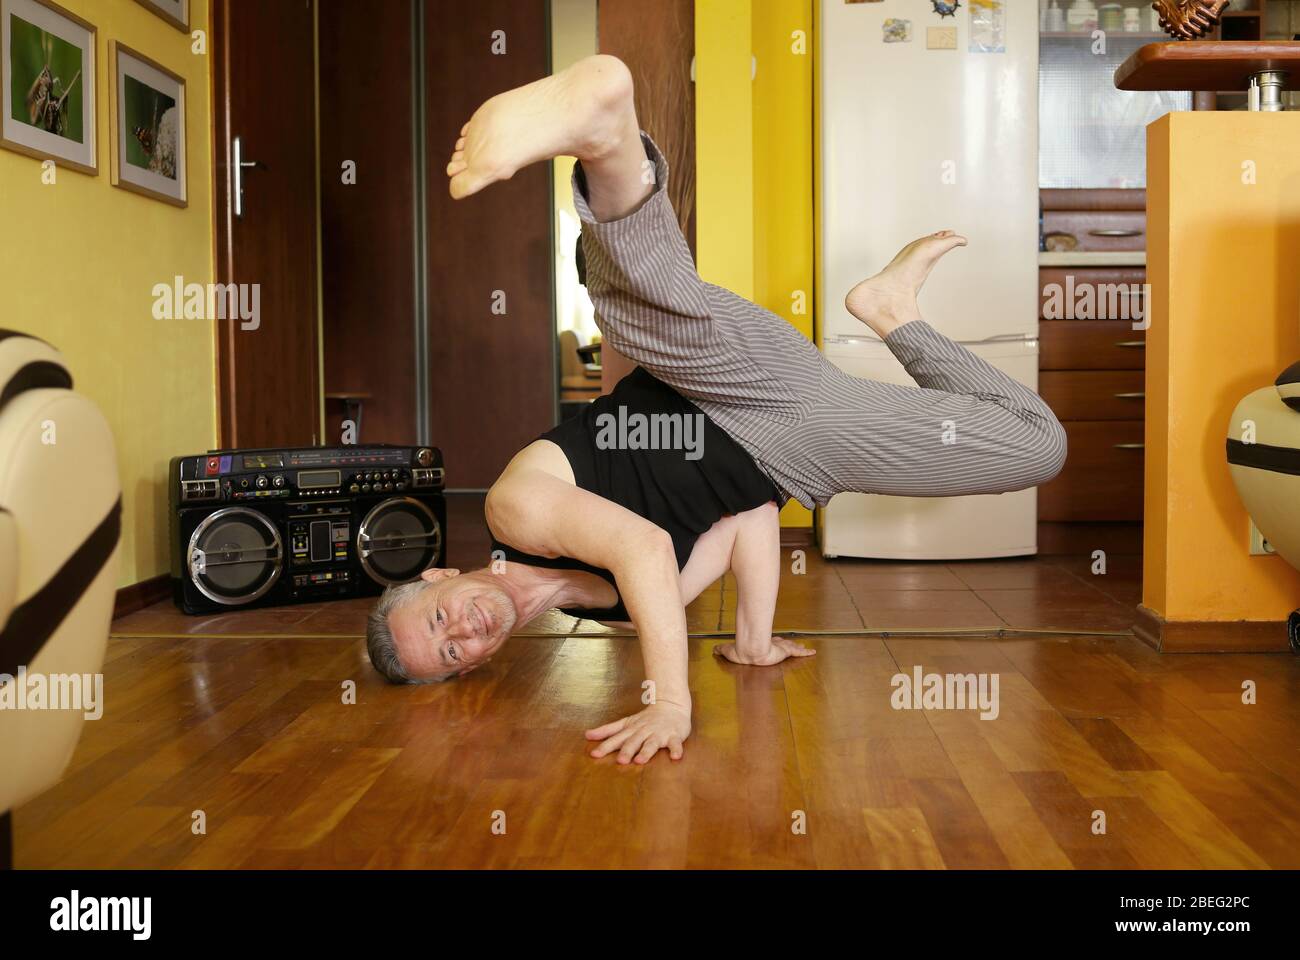 guy practicing dance at home, man in breakdance pose Stock Photo